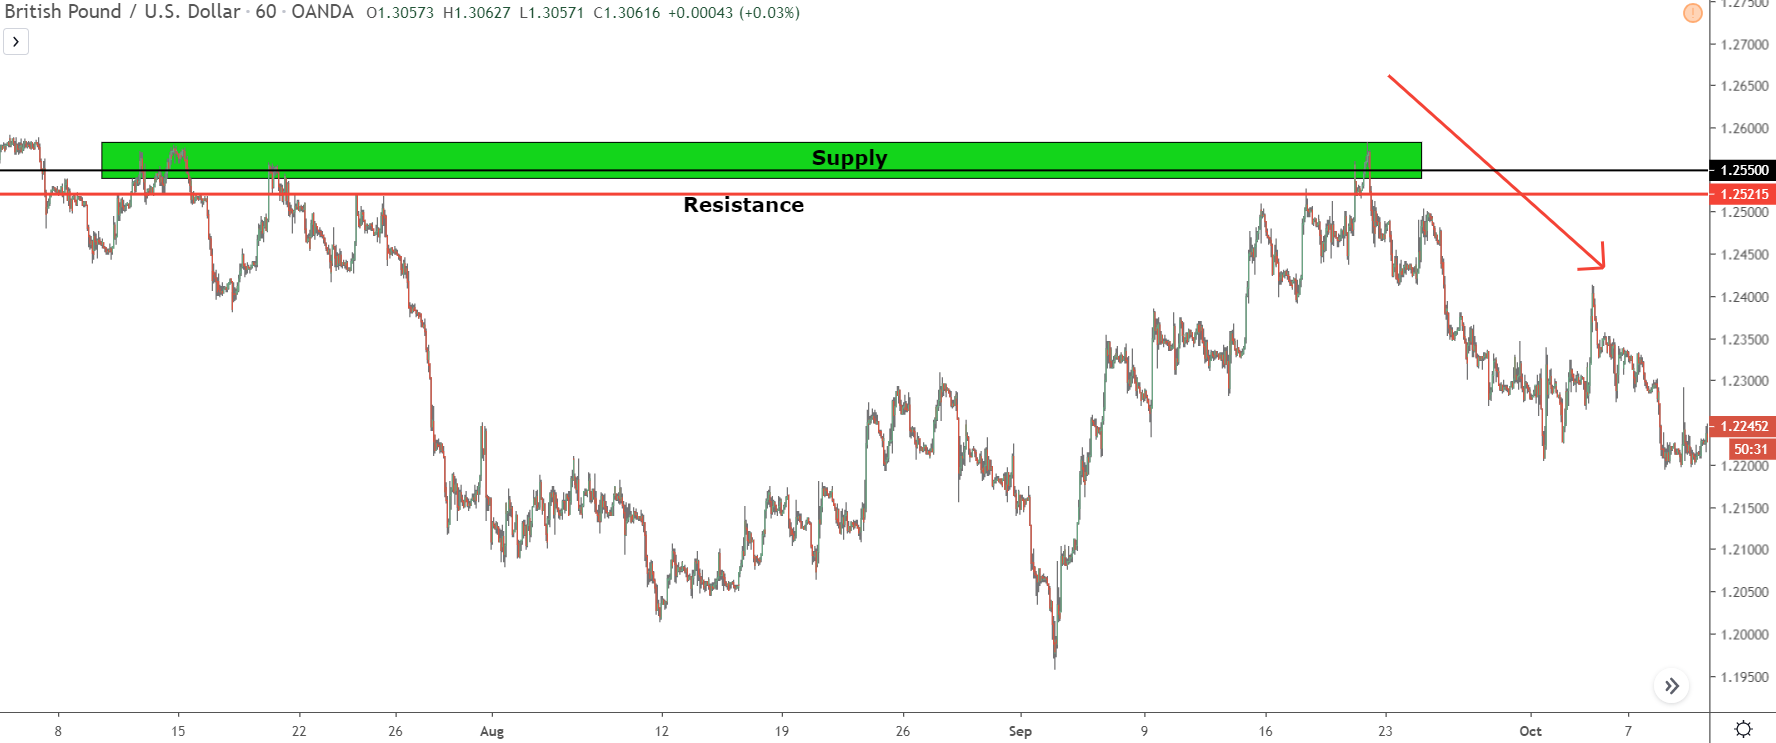 price reversing from resistance level and big round number 